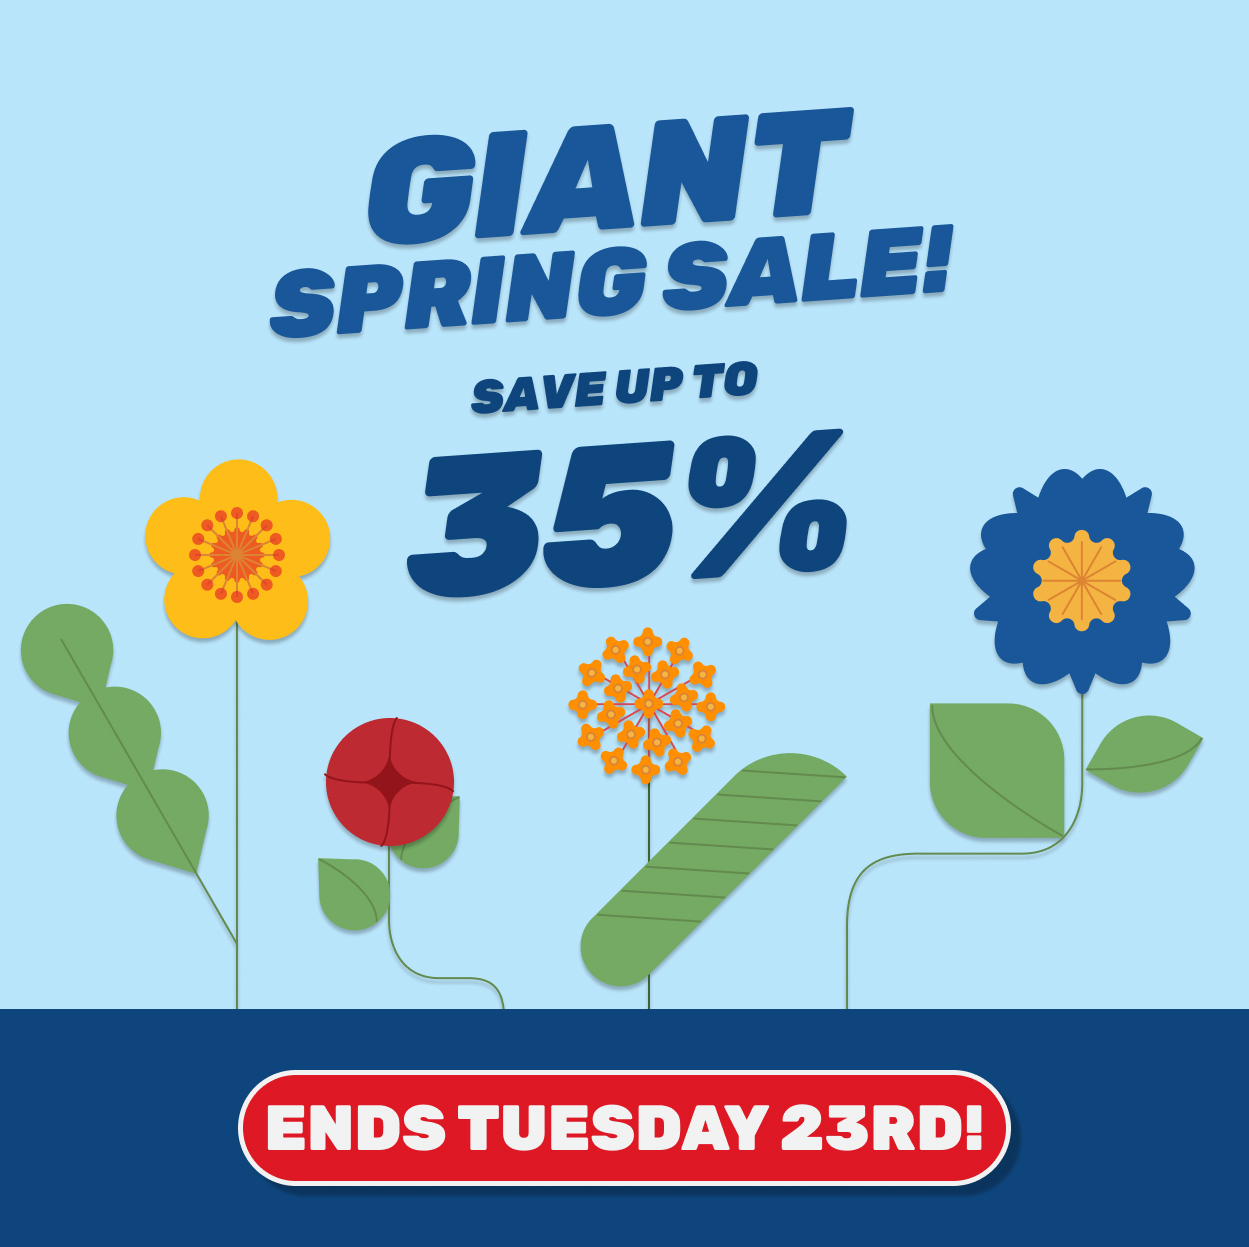 Giant Spring Sale!